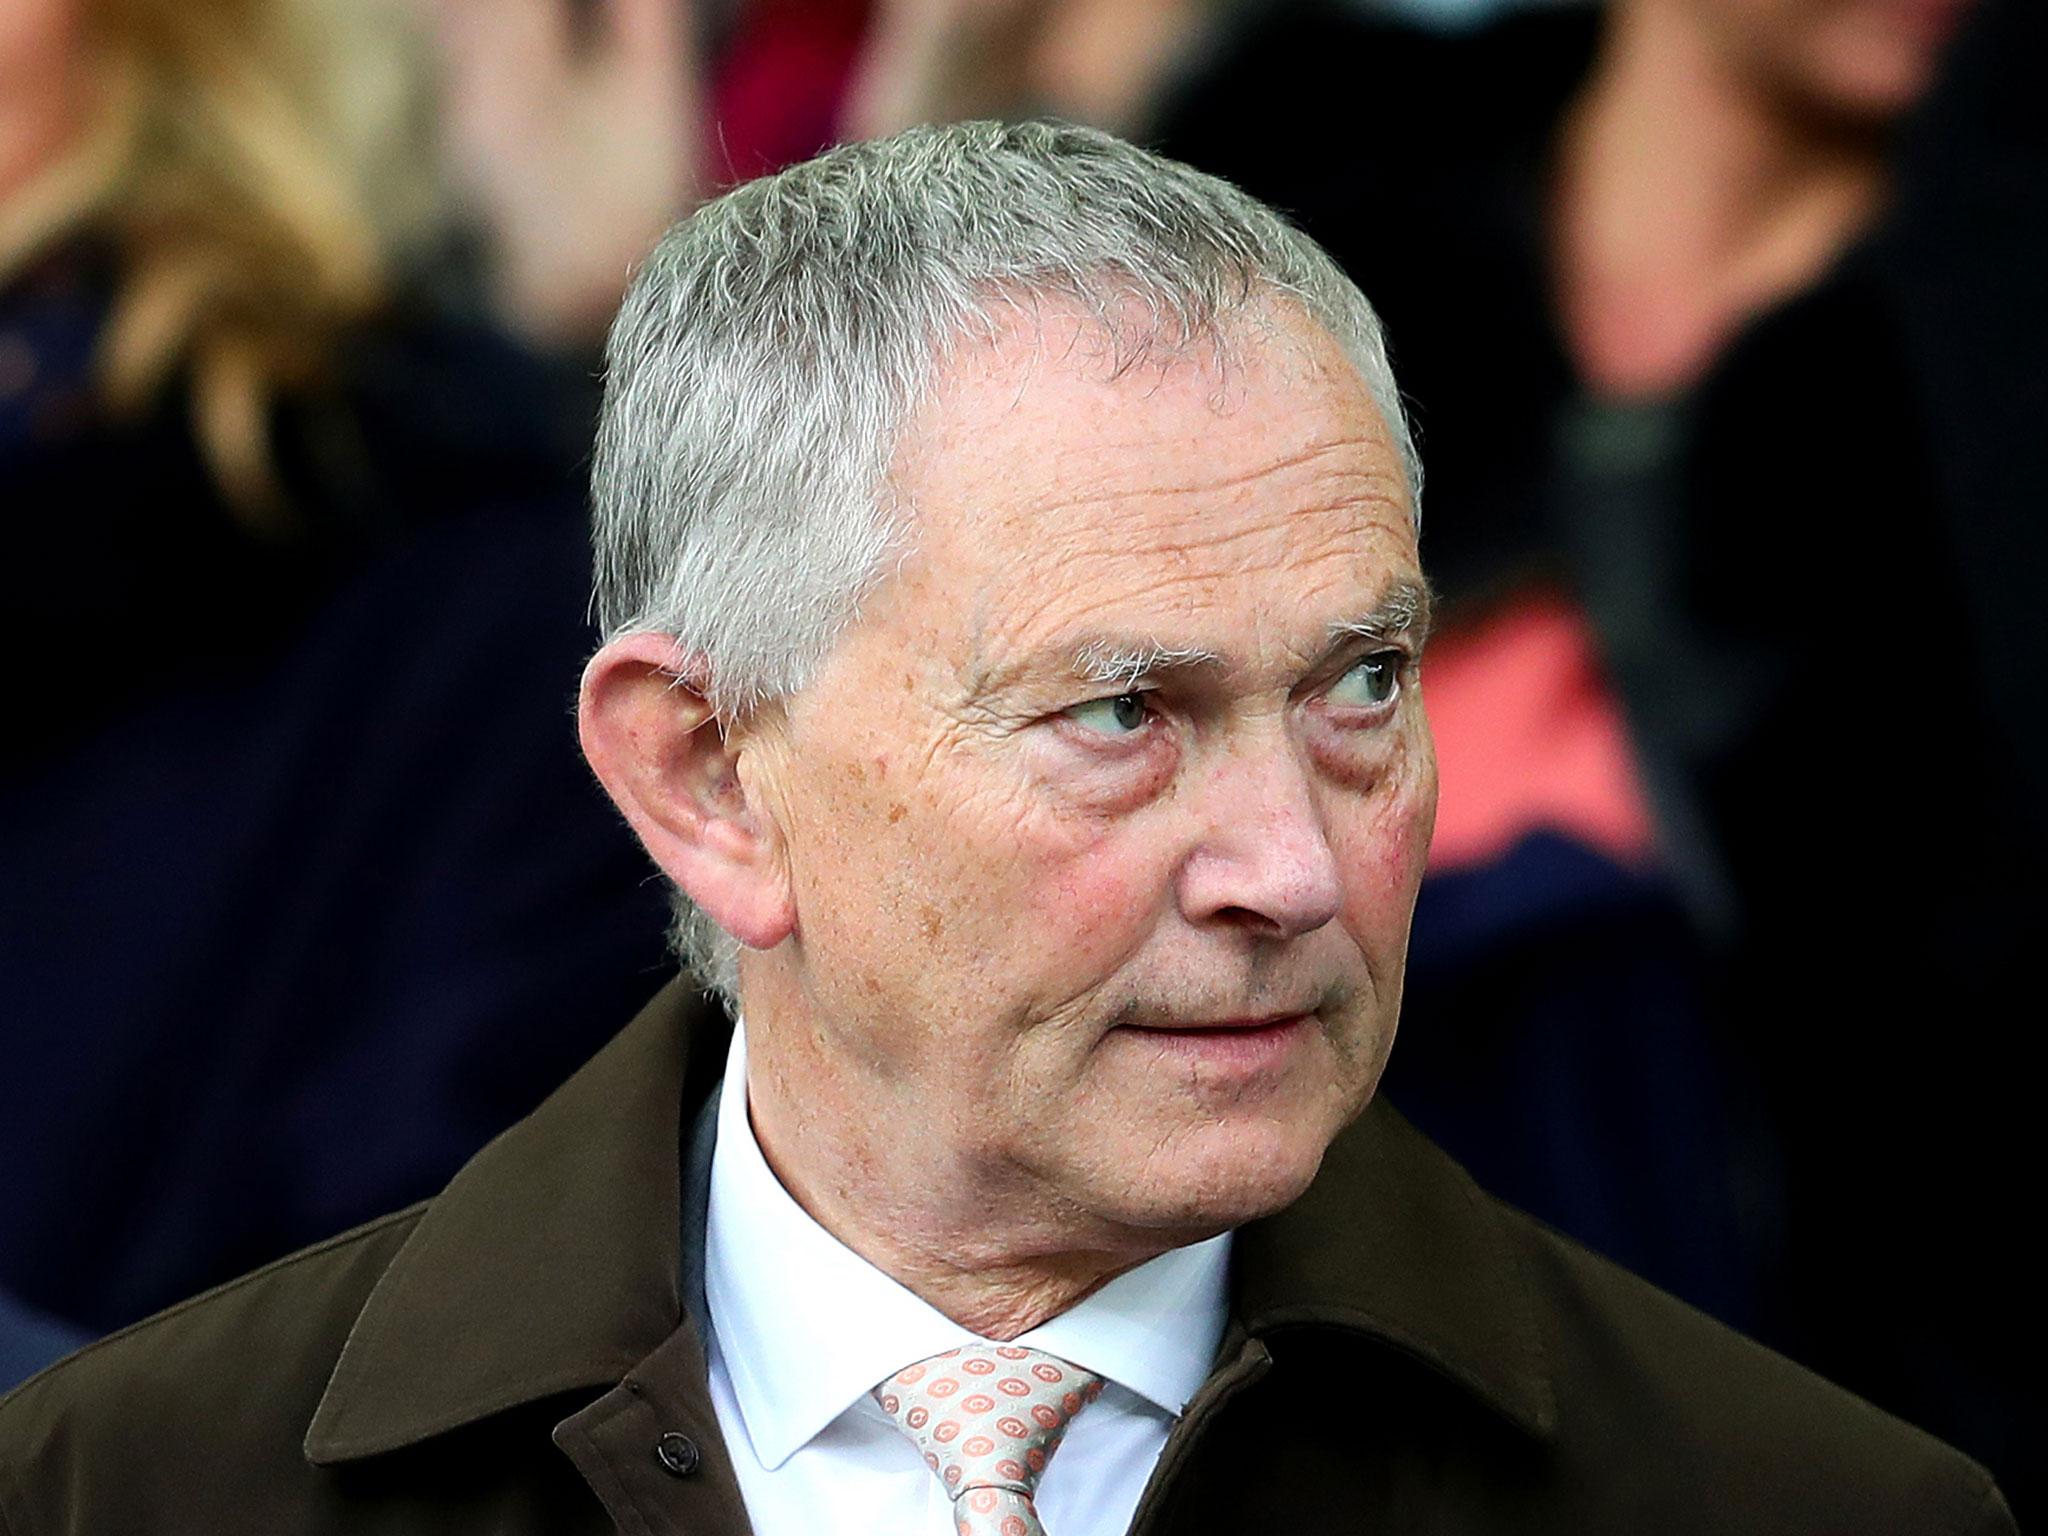 Scudamore helped negotiate the deal with Amazon